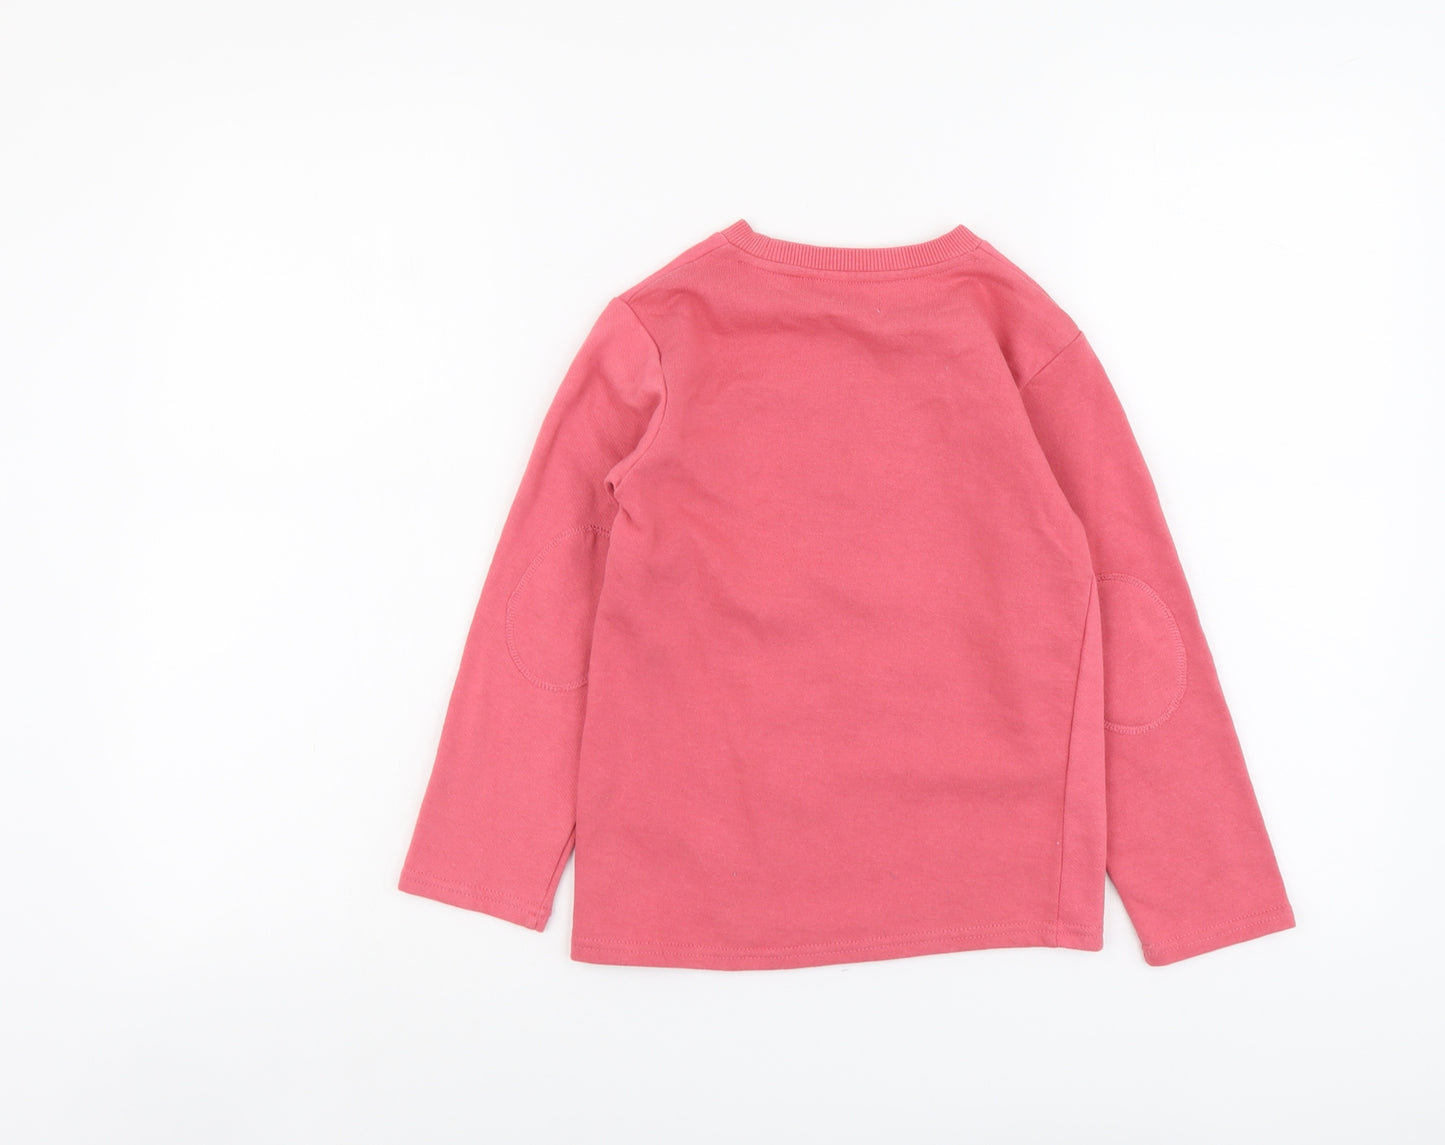 Basic Girls Pink Cotton Pullover Sweatshirt Size 7-8 Years Pullover - Coyotes